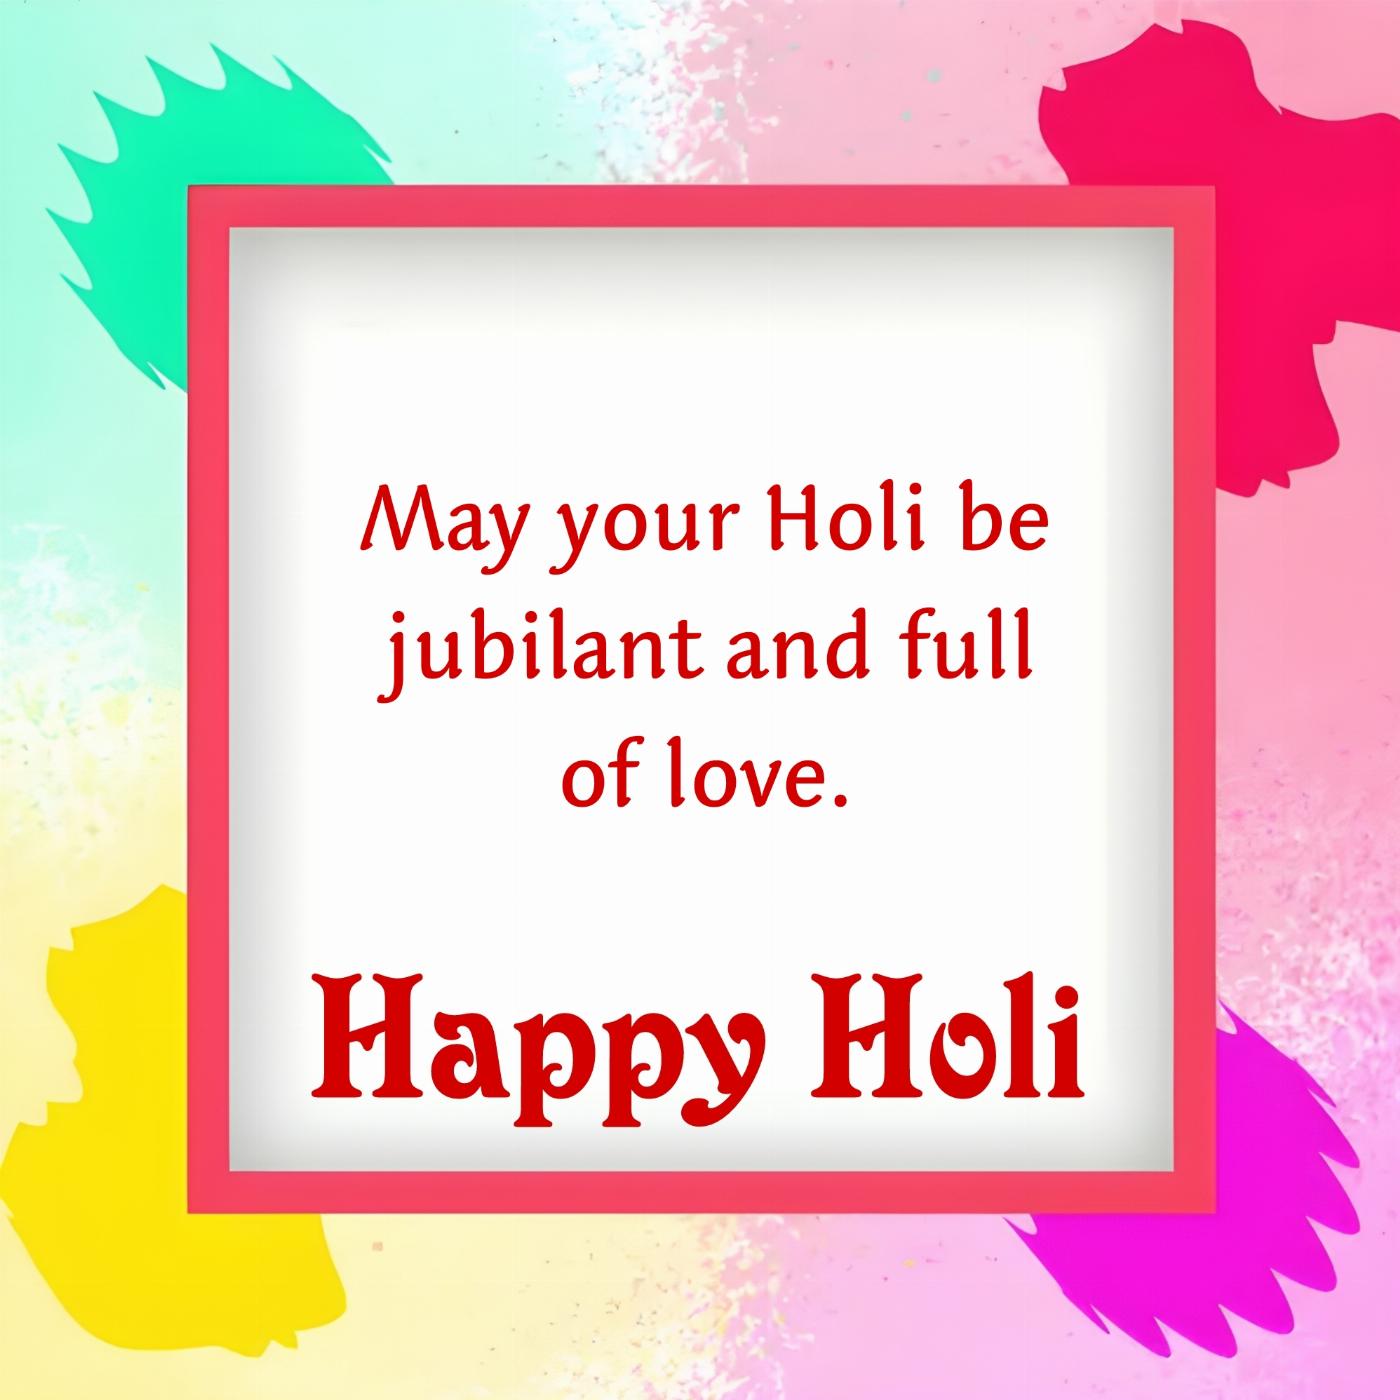 May your Holi be jubilant and full of love